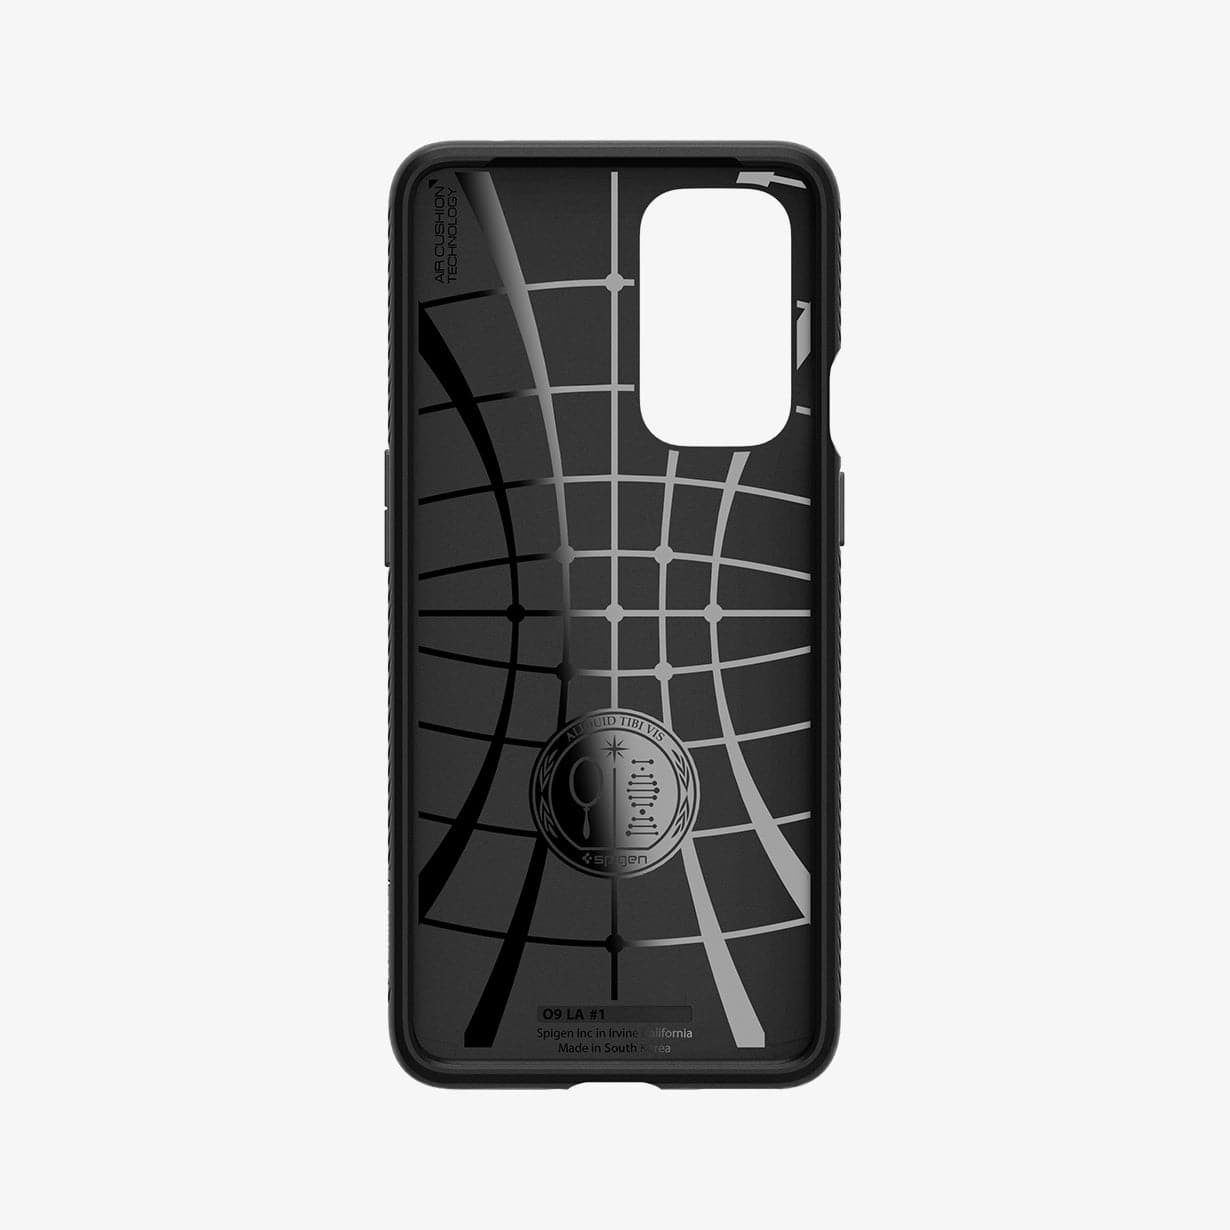 ACS02684 - OnePlus 9 5G Liquid Air Case in Matte Black showing the inner case with spider web pattern